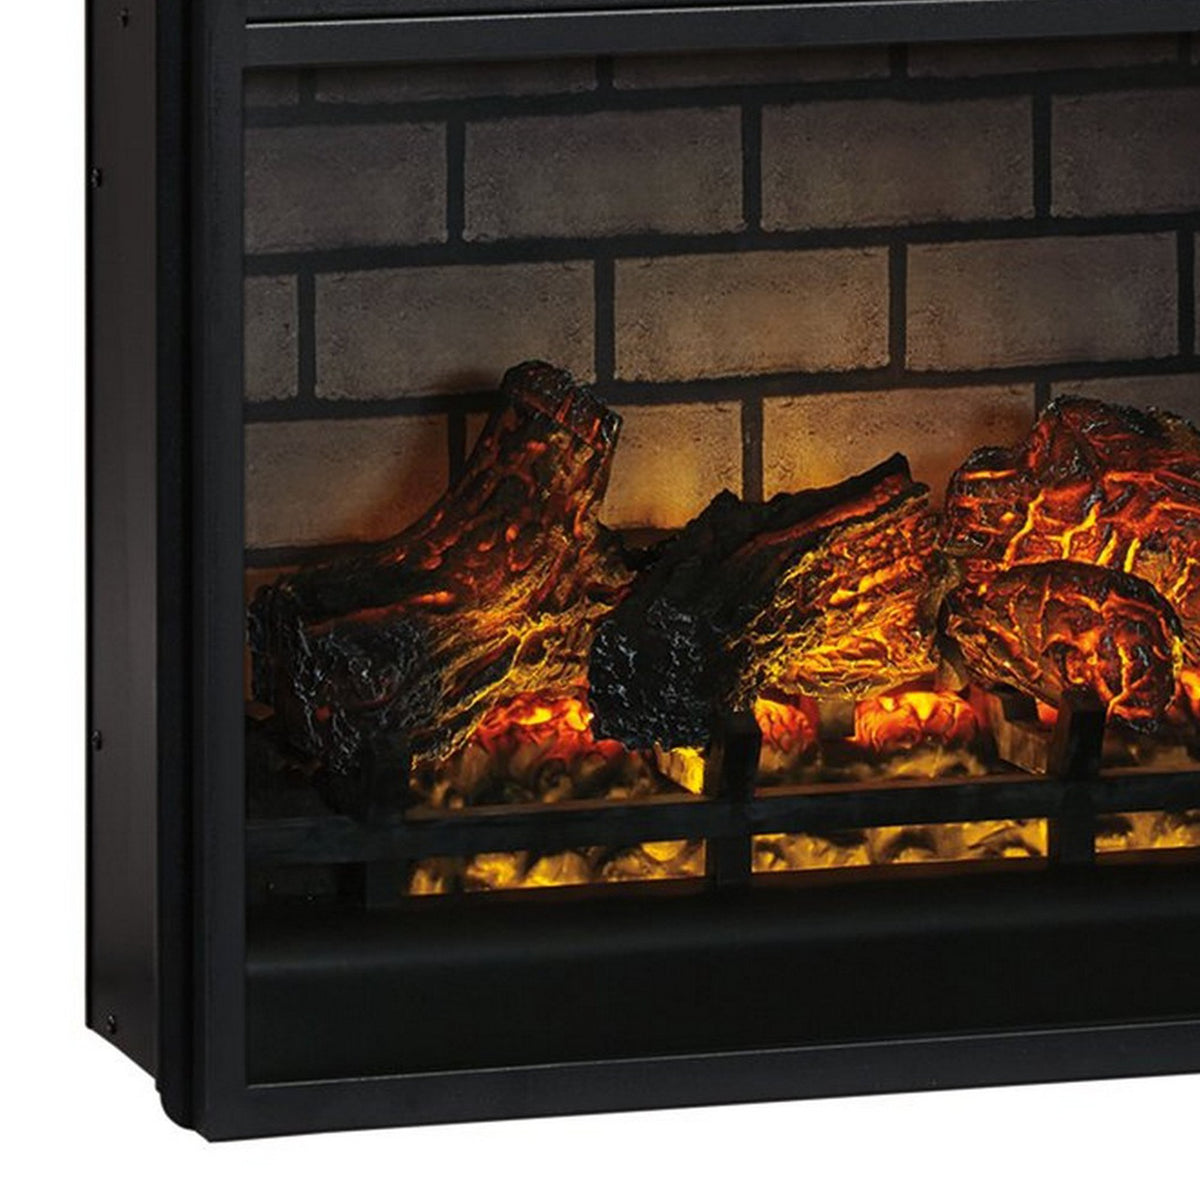 23.75 Inch Metal Fireplace Inset with 7 Level Temperature Setting, Black - BM227444